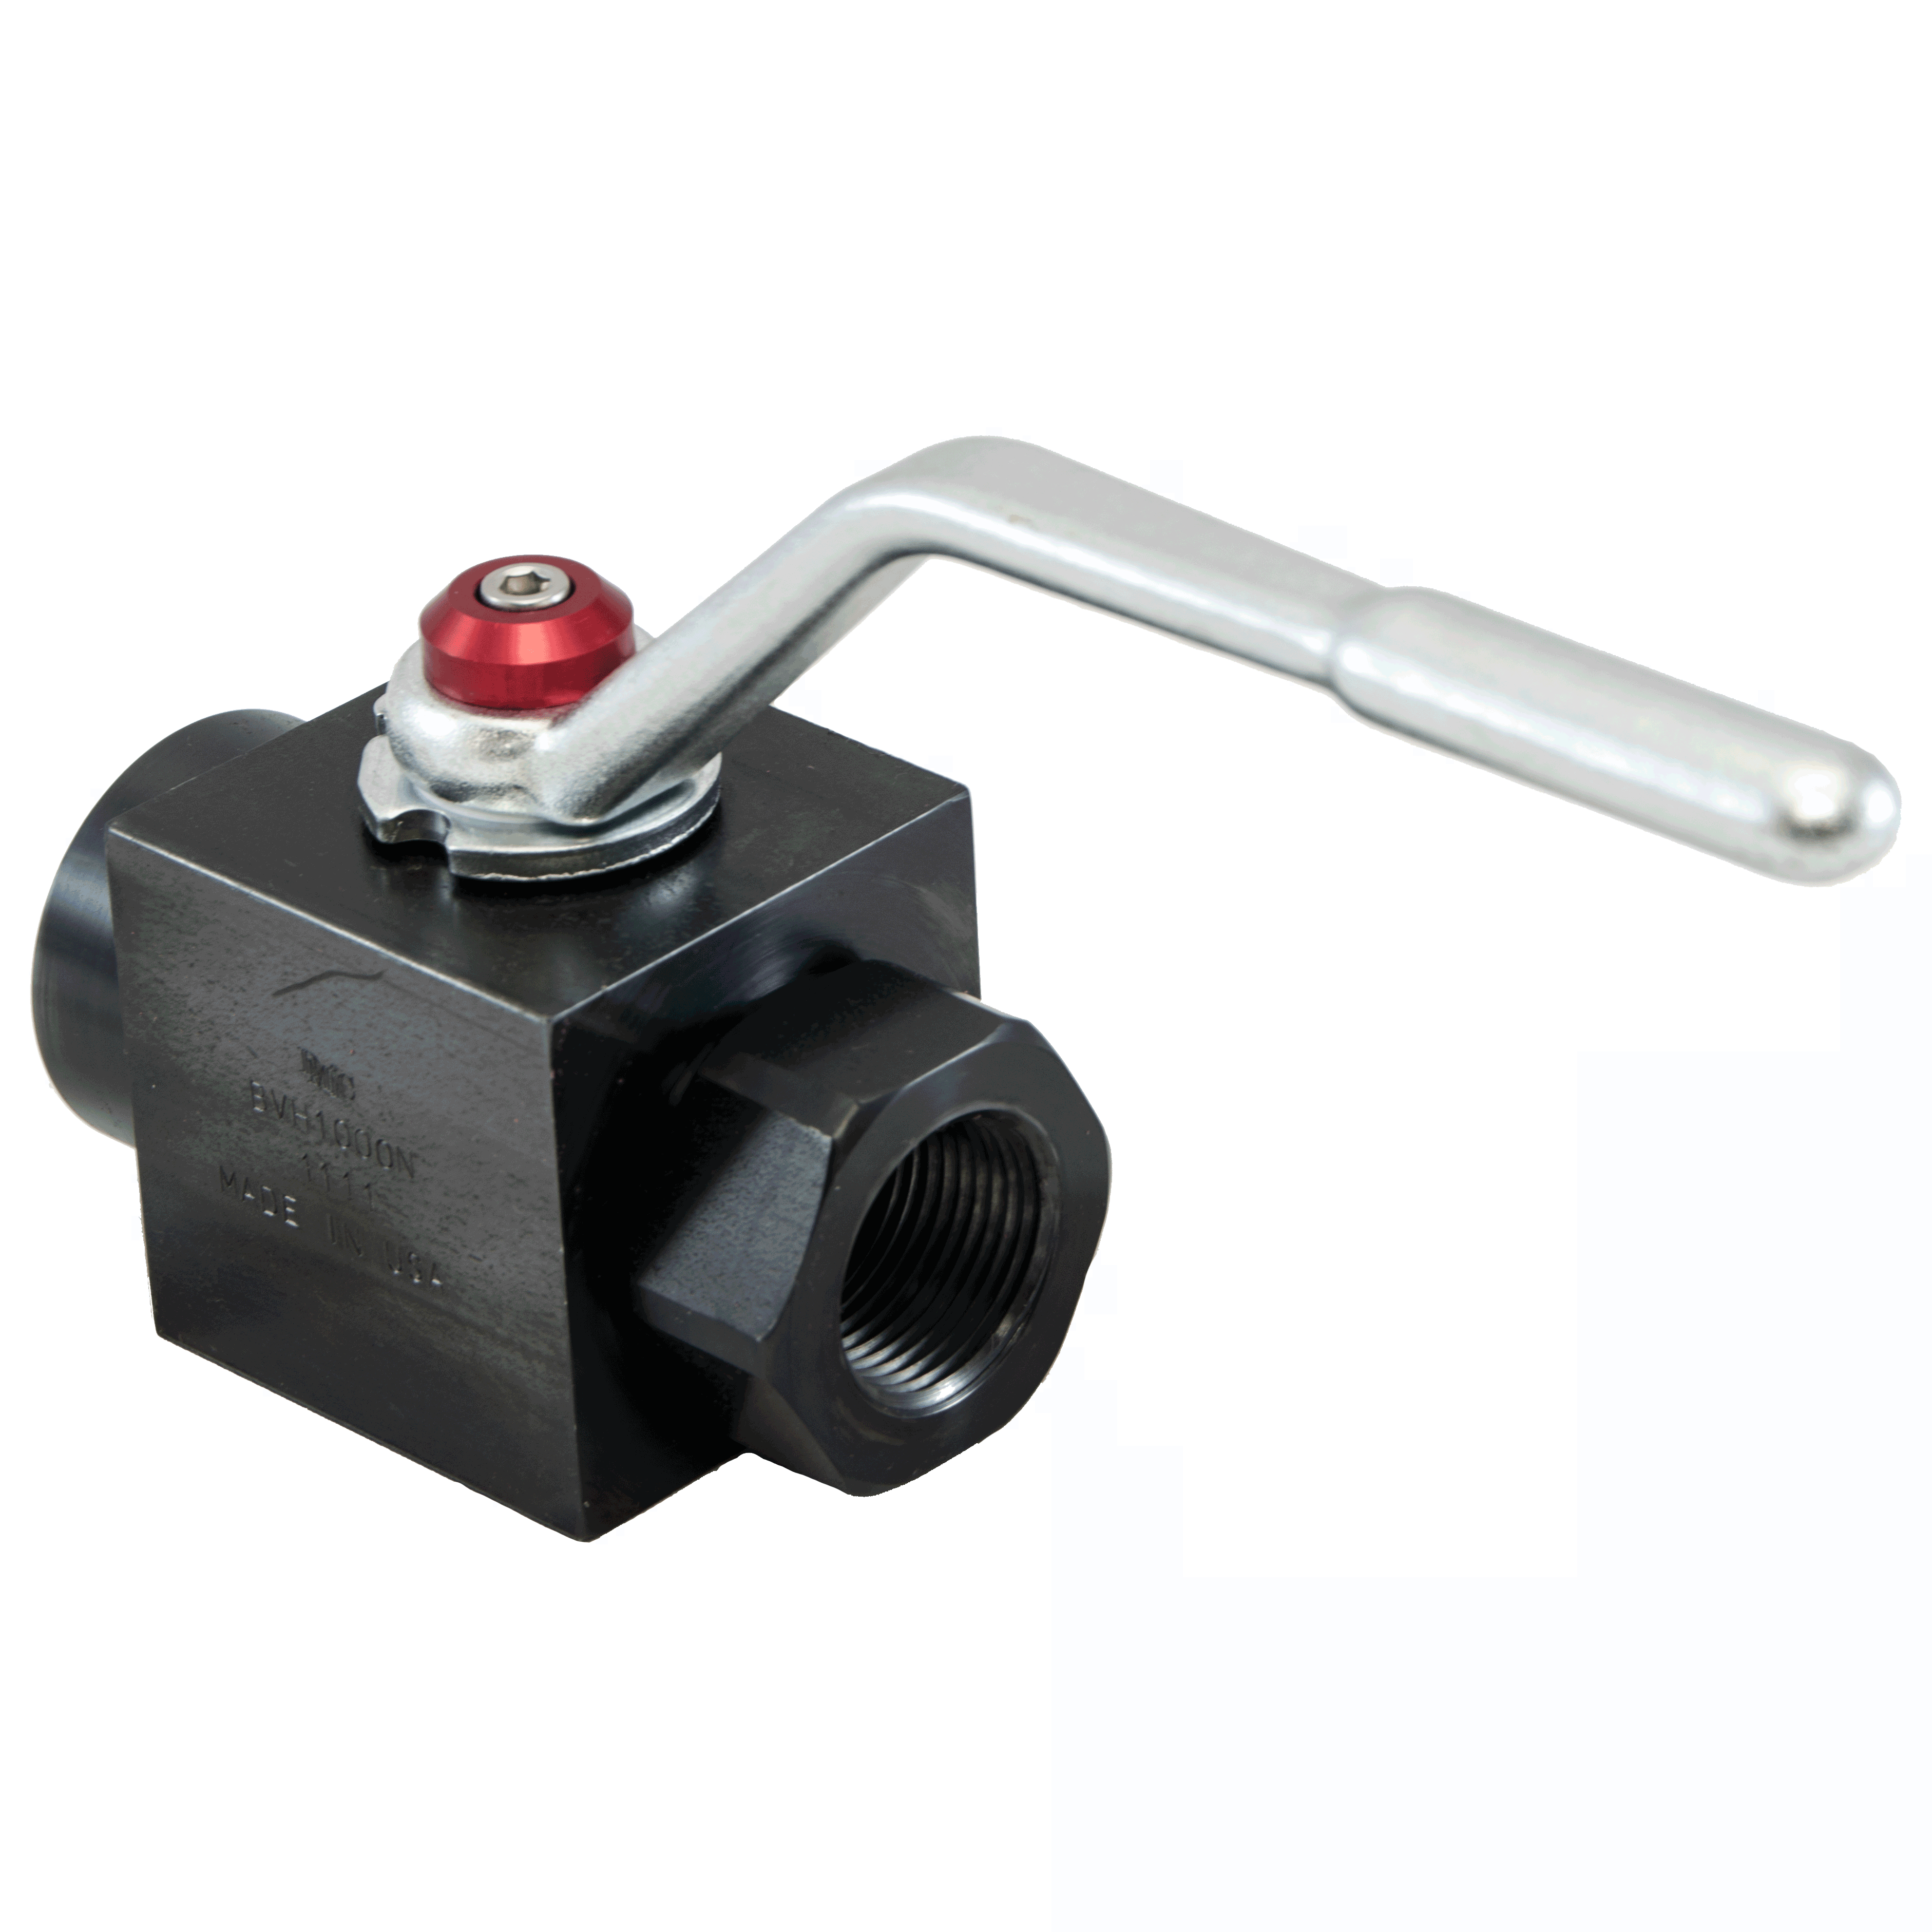 BVH-0375S-1111 : DMIC Square Body Ball Valve, #6 SAE (3/8), Carbon Steel, 7500psi, Two-Way